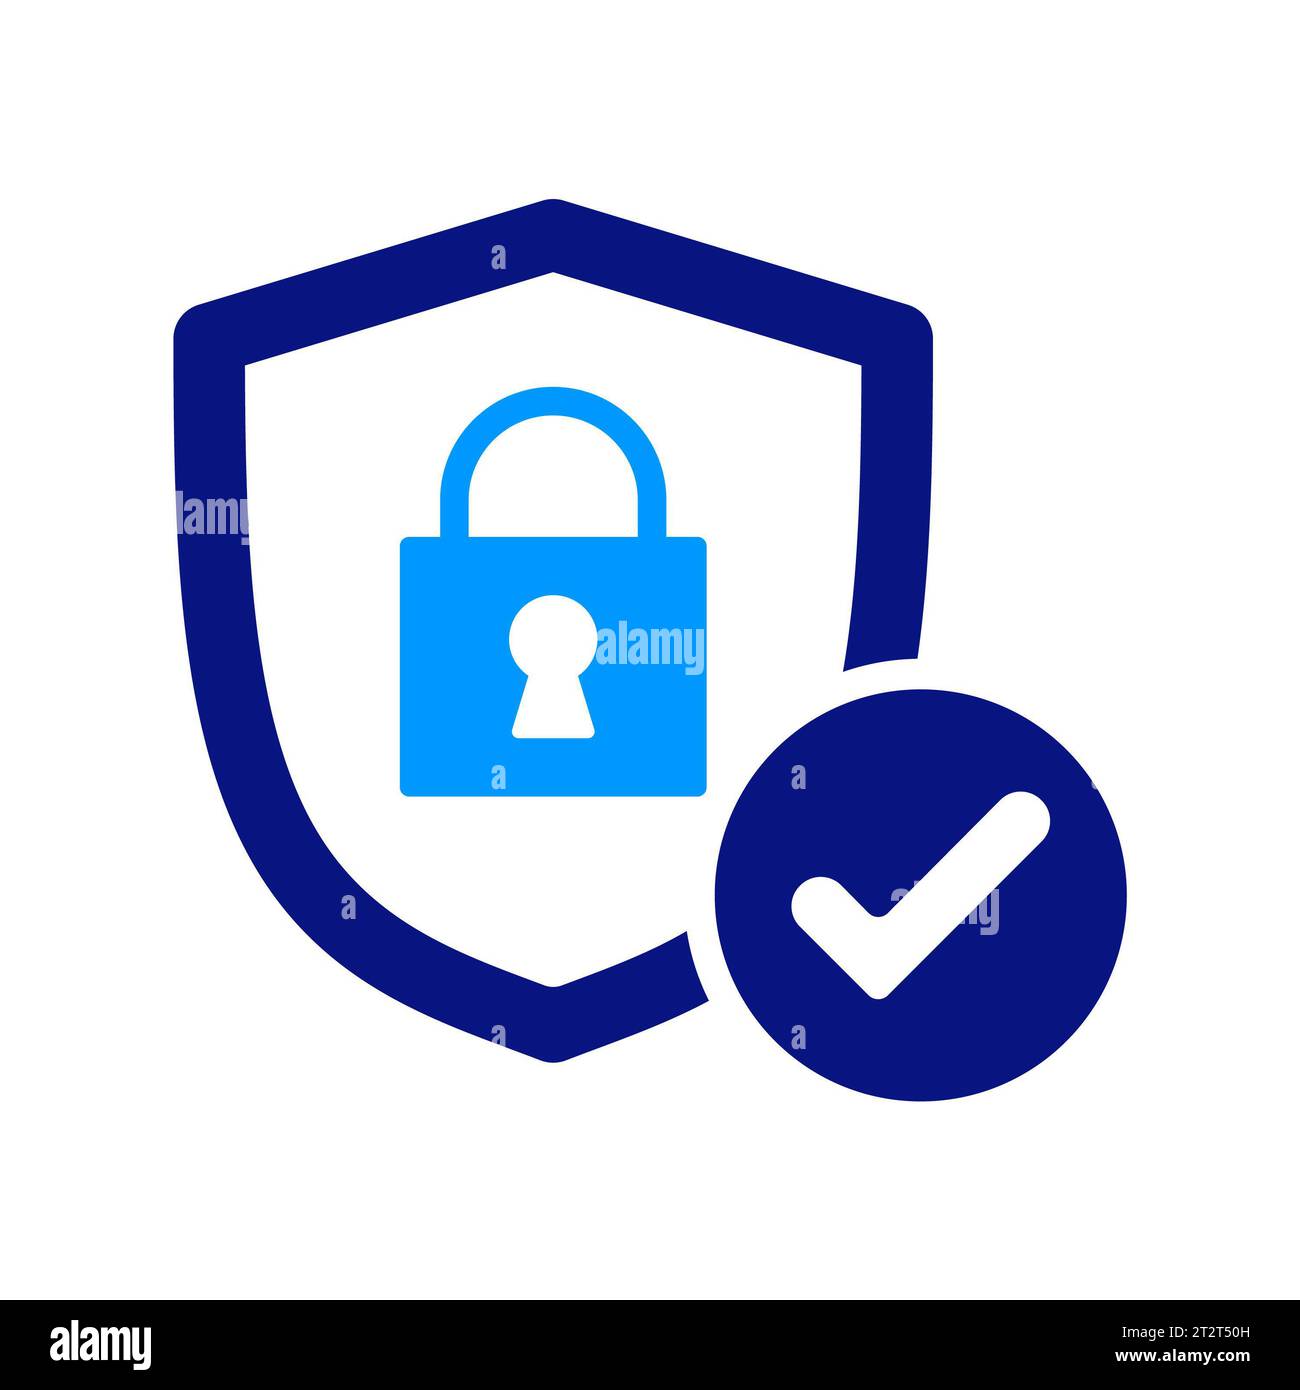 Safety lock in shield. VULNERABILITY DISCLOSURE POLICY, Cyber Security. Protection, Secure, Network Unlock. Padlock. icon set. Stock Photo